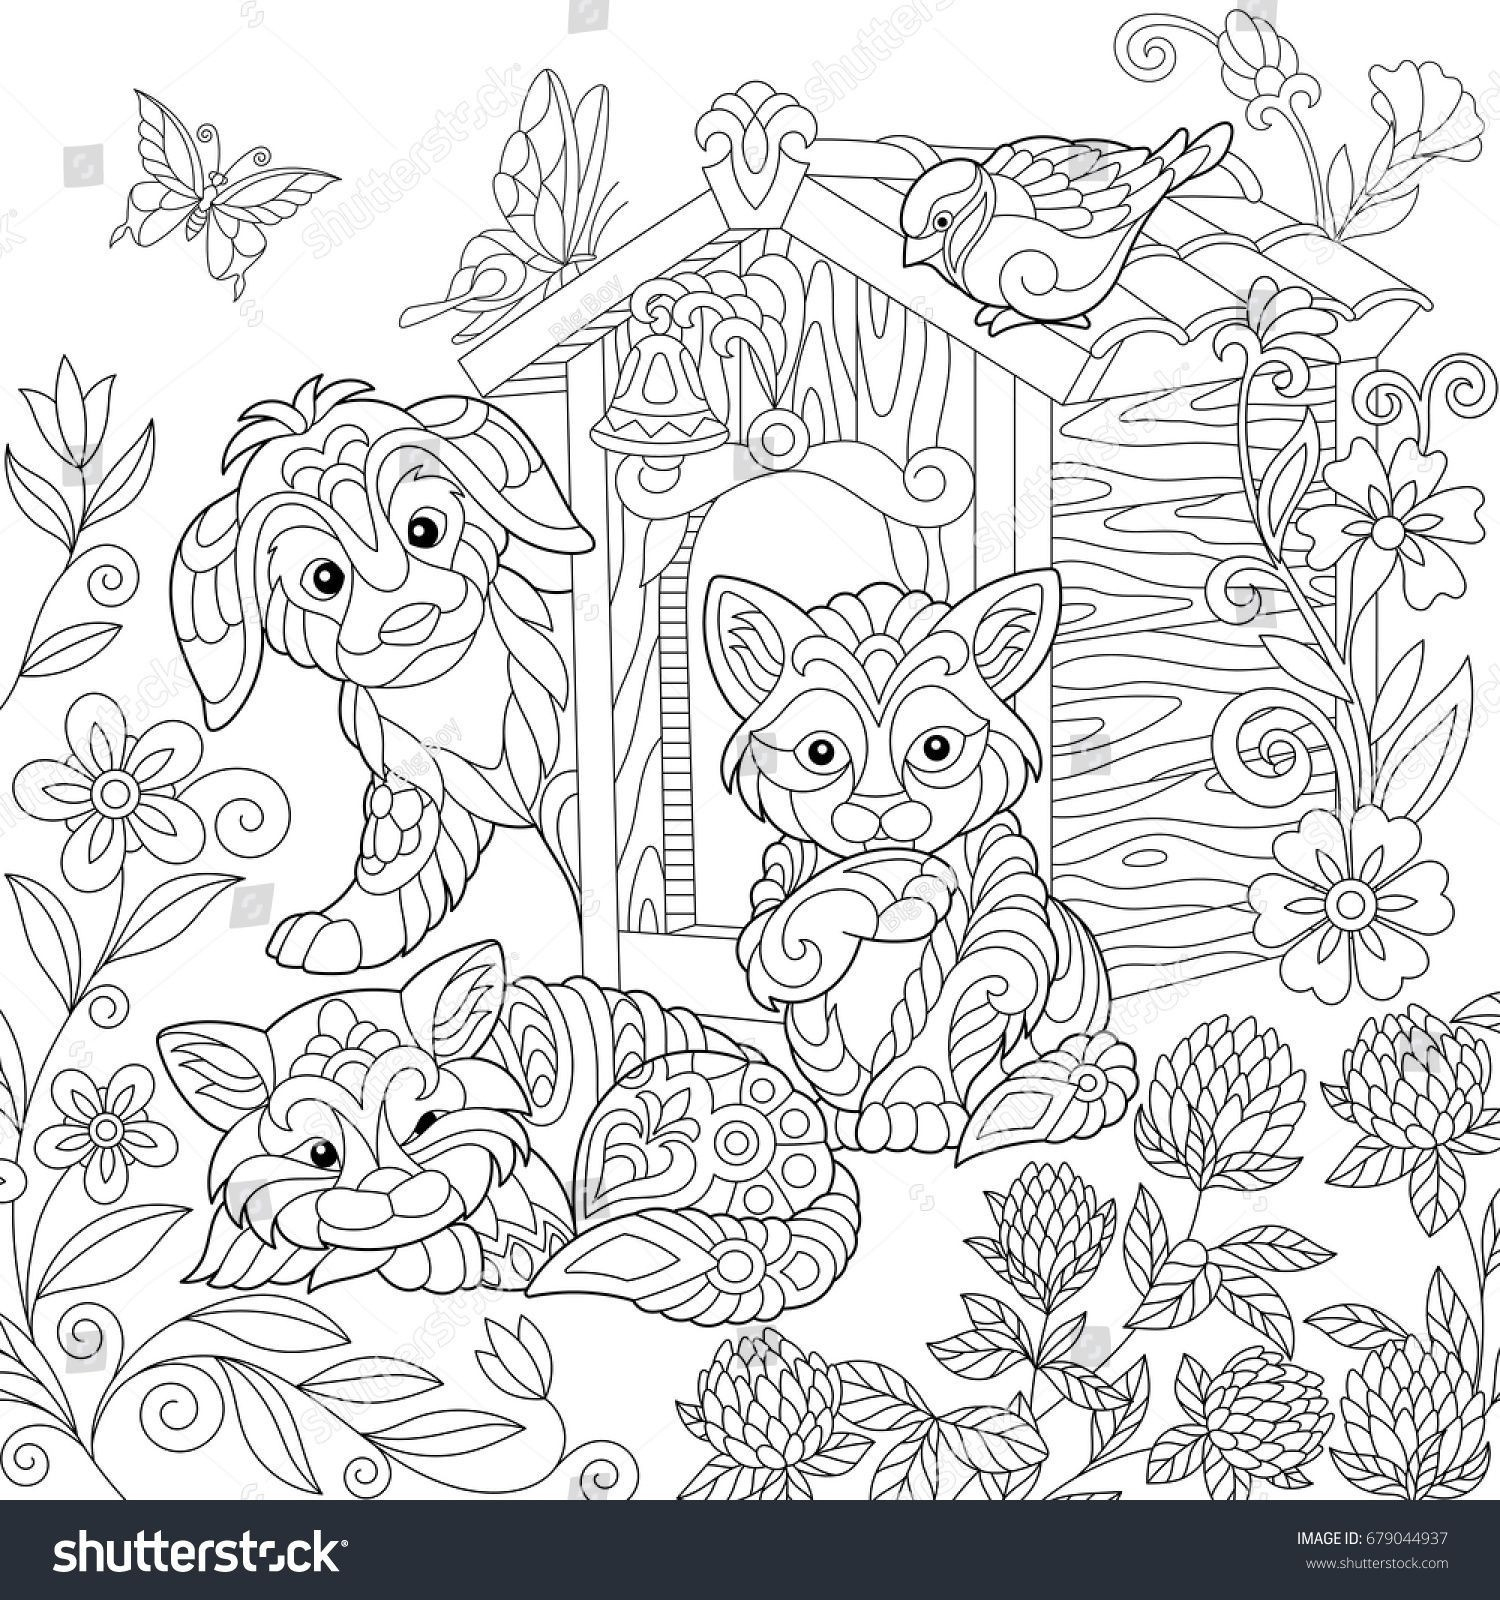 Free Printable Aboriginal Colouring Pages Beautiful Printable - Free Printable Aboriginal Colouring Pages